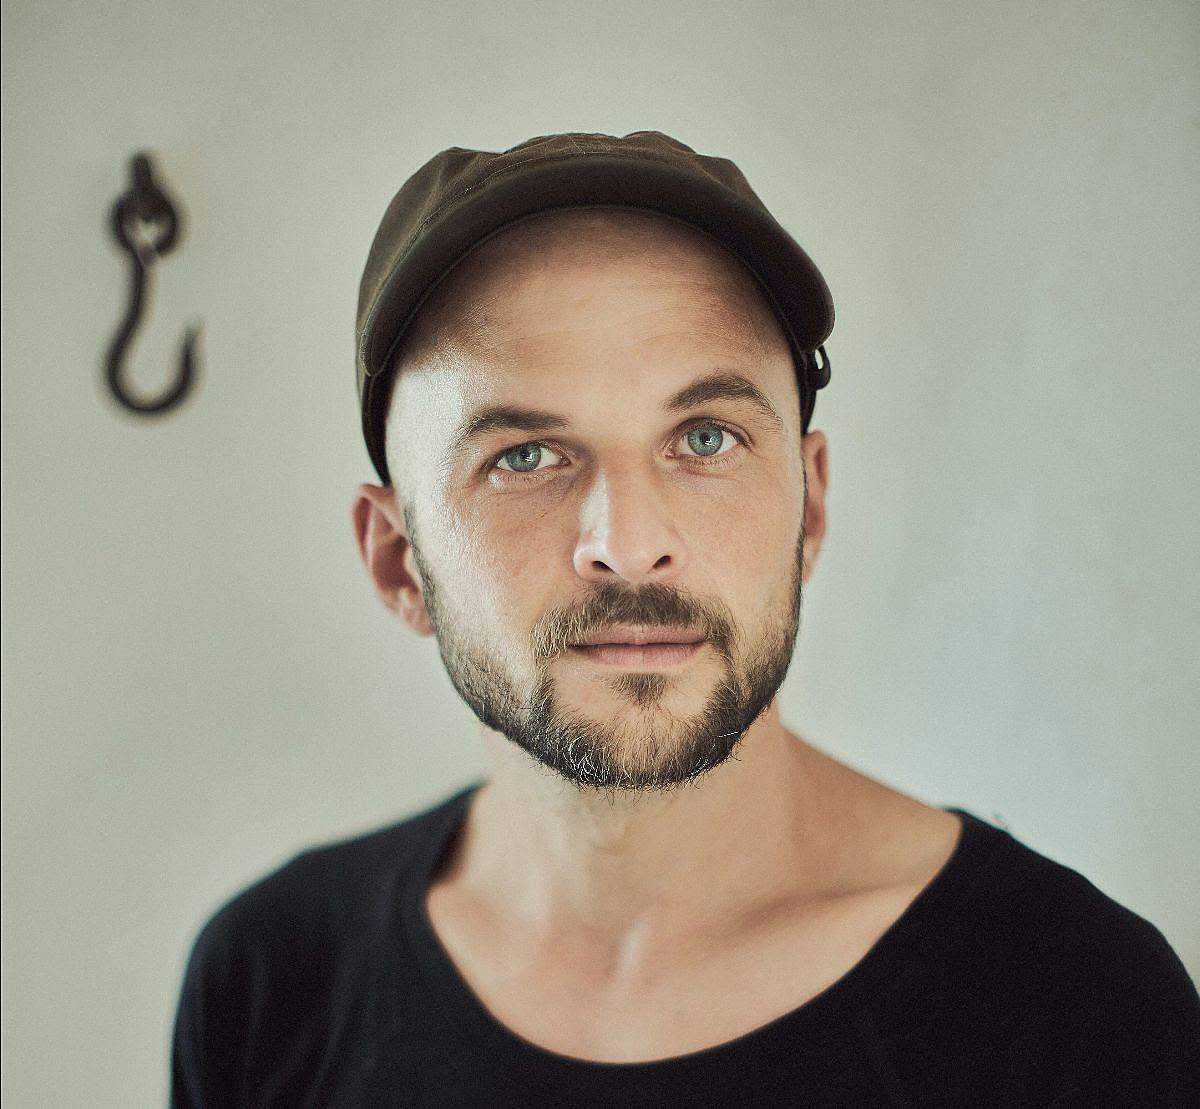 Nils Frahm releasing 'Spaces' LP and playing NYC in November (dates &  streams)